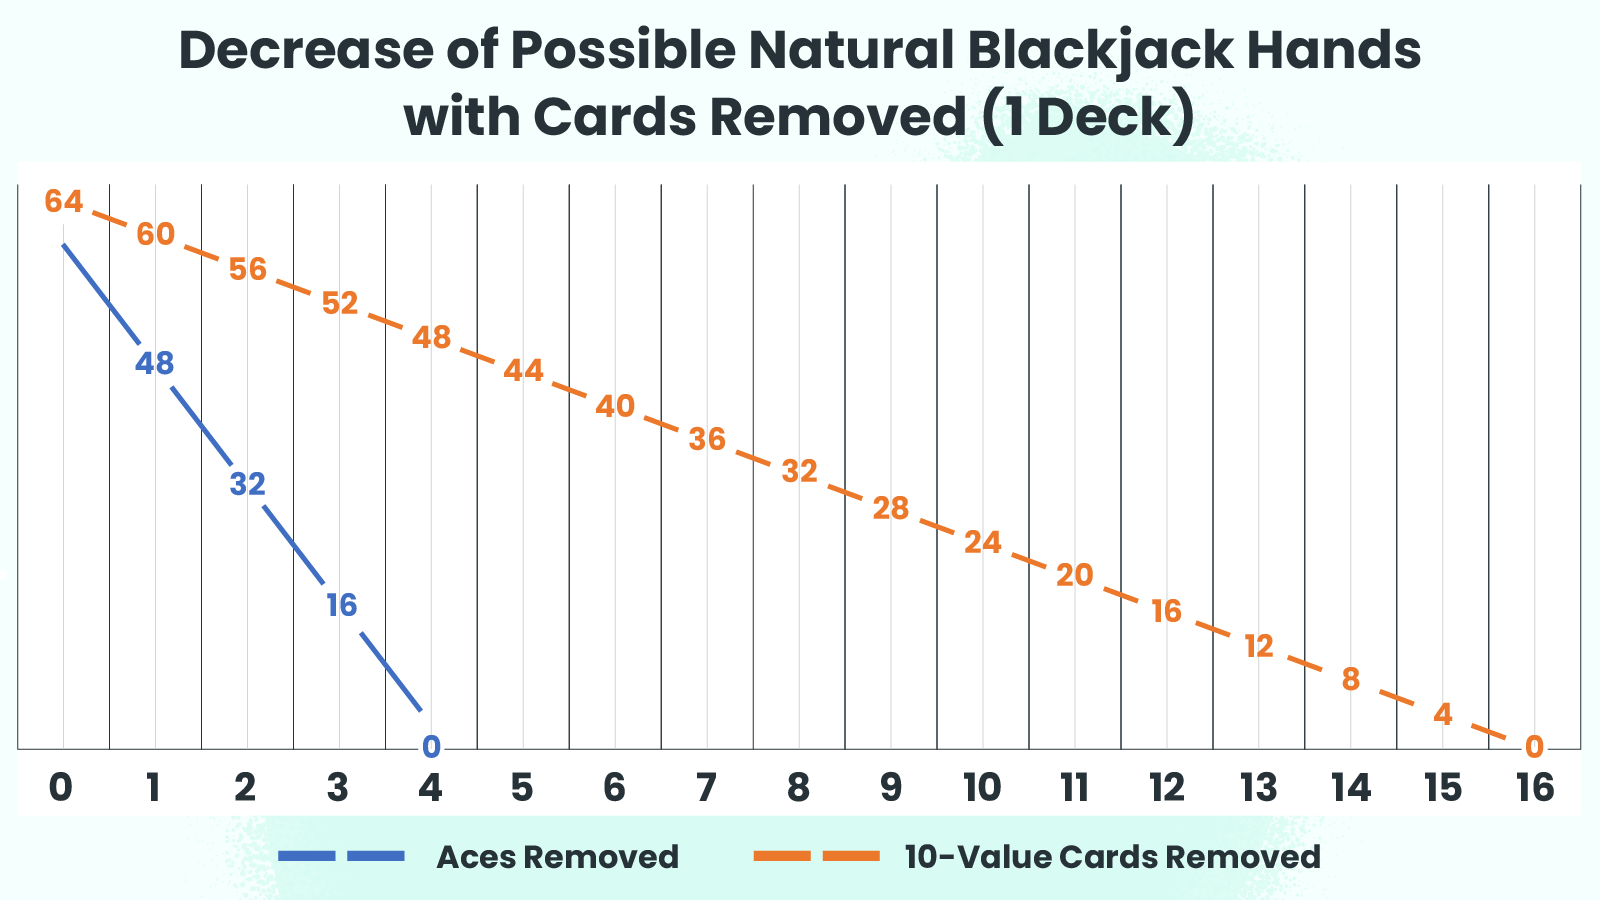 Decrease of Possible Natural Blackjack Hands with Cards Removed (1 Deck)